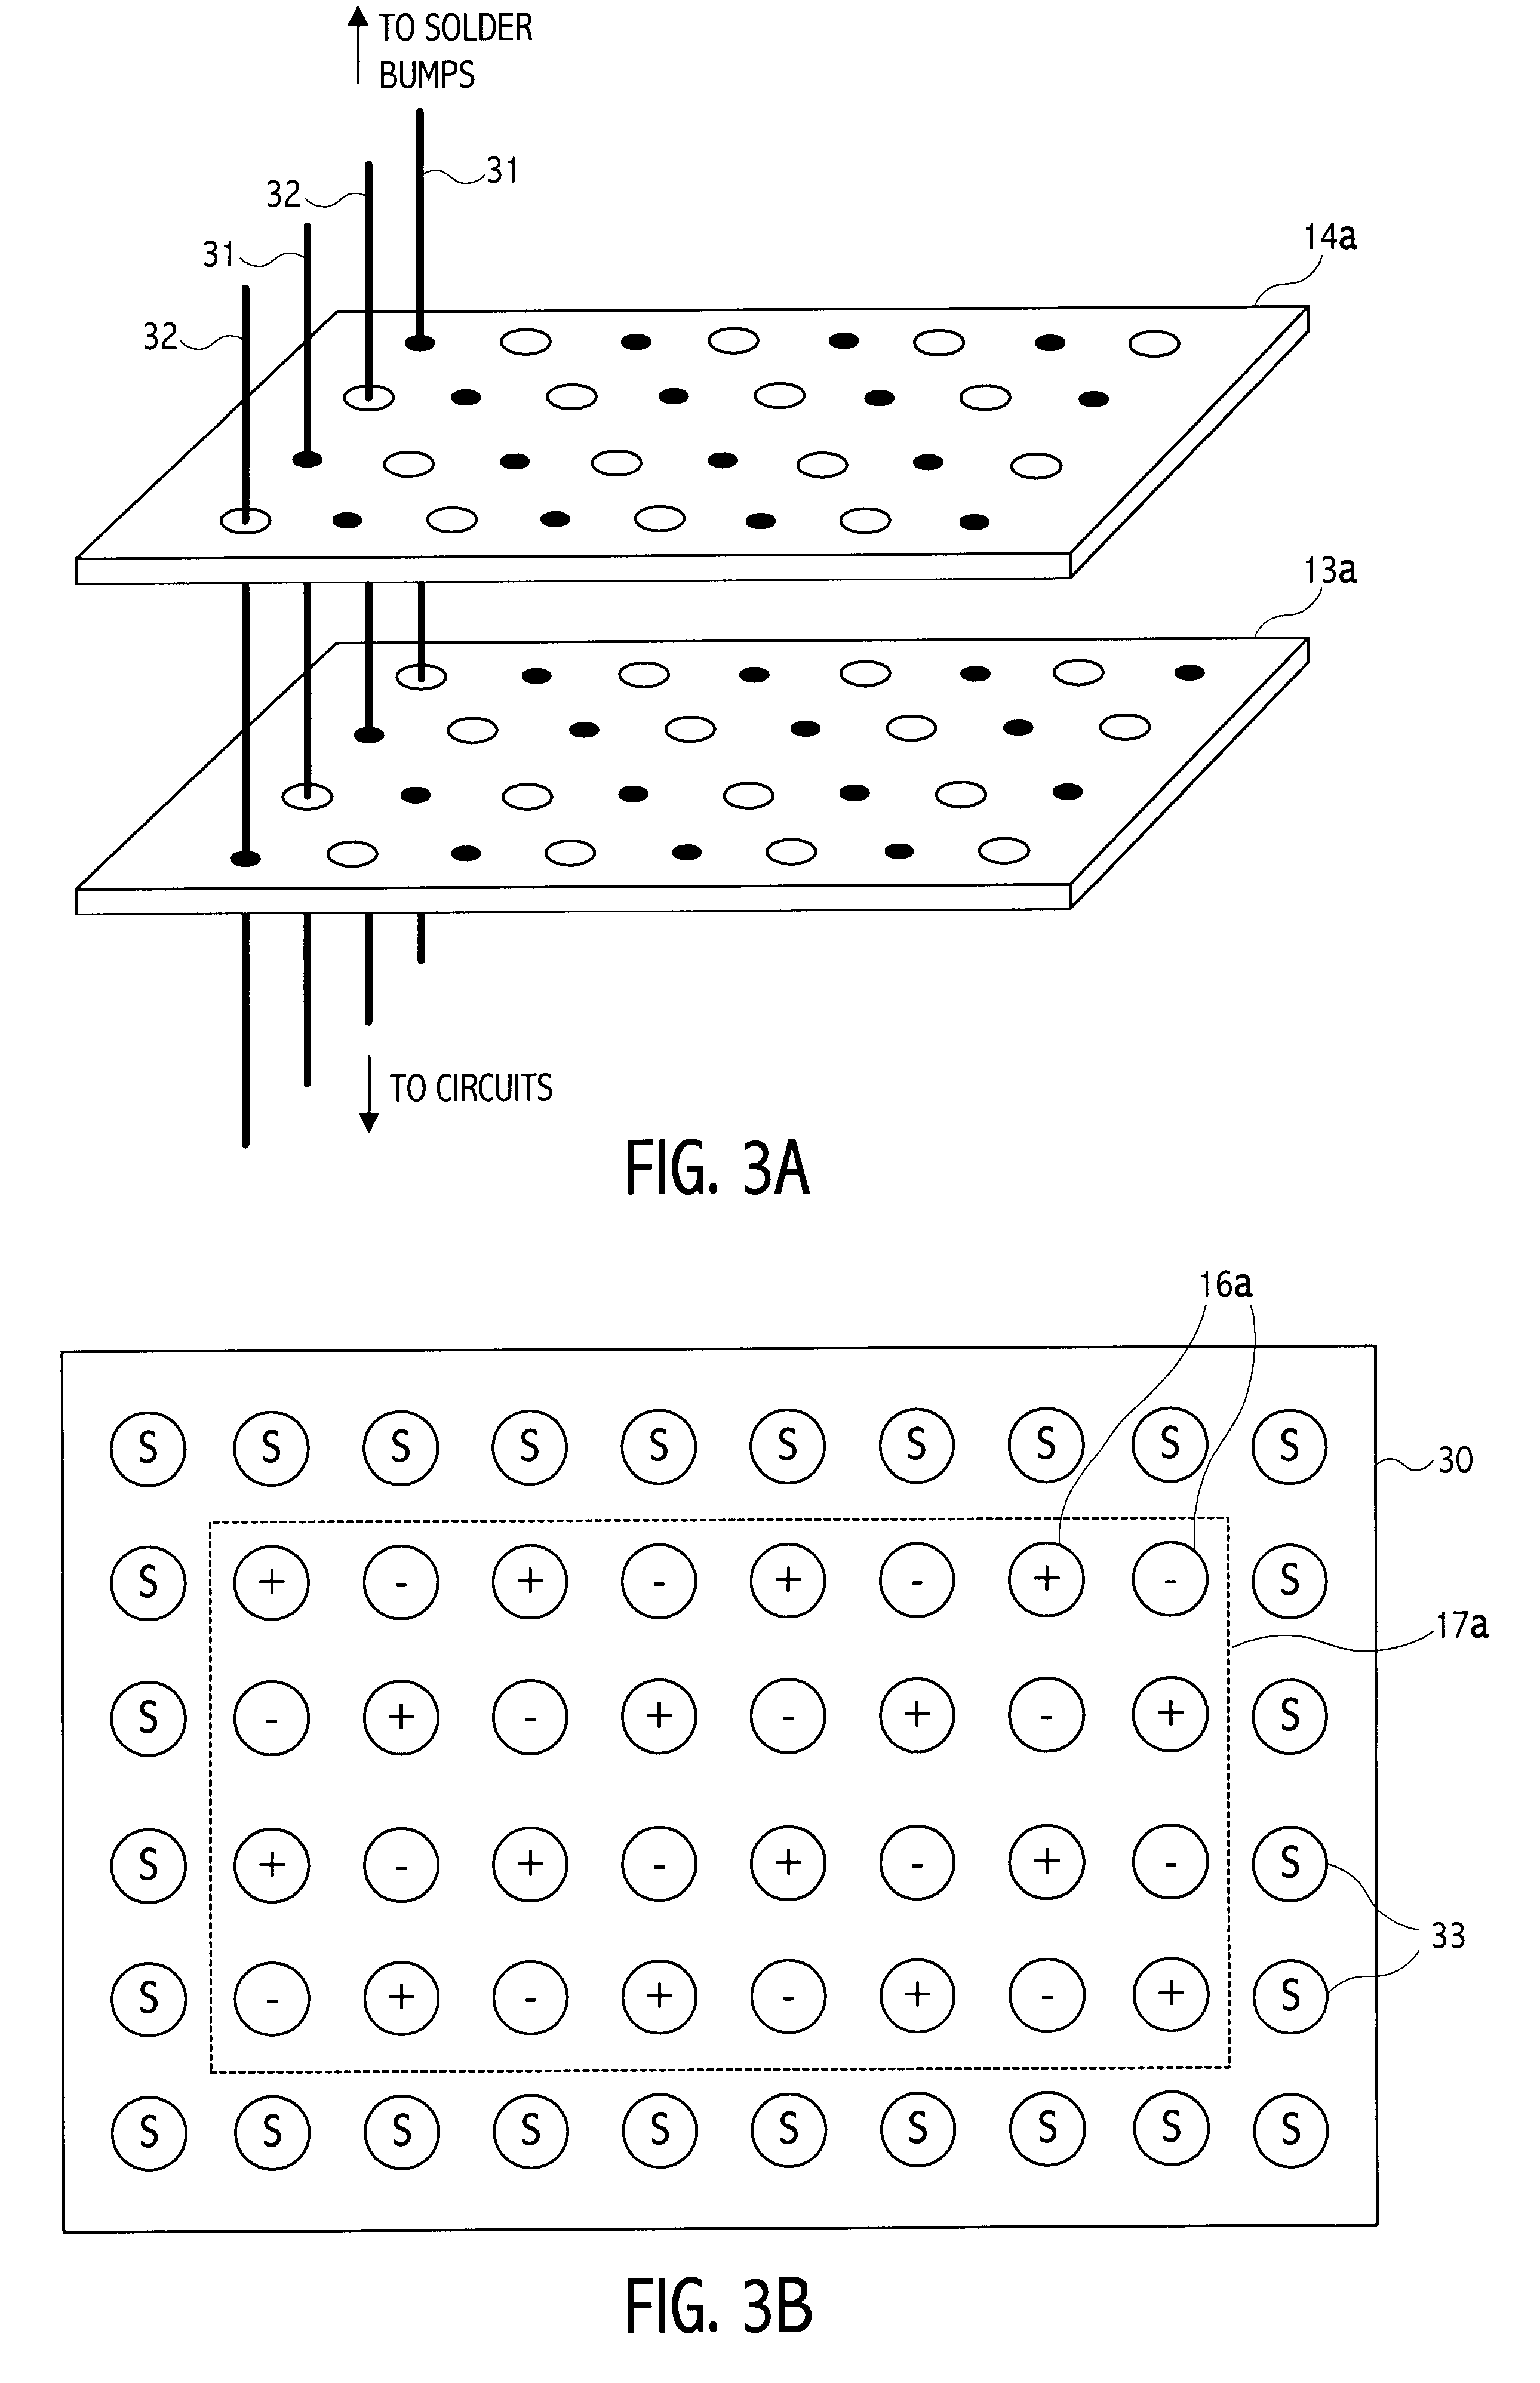 Decoupling capacitor configuration for integrated circuit chip